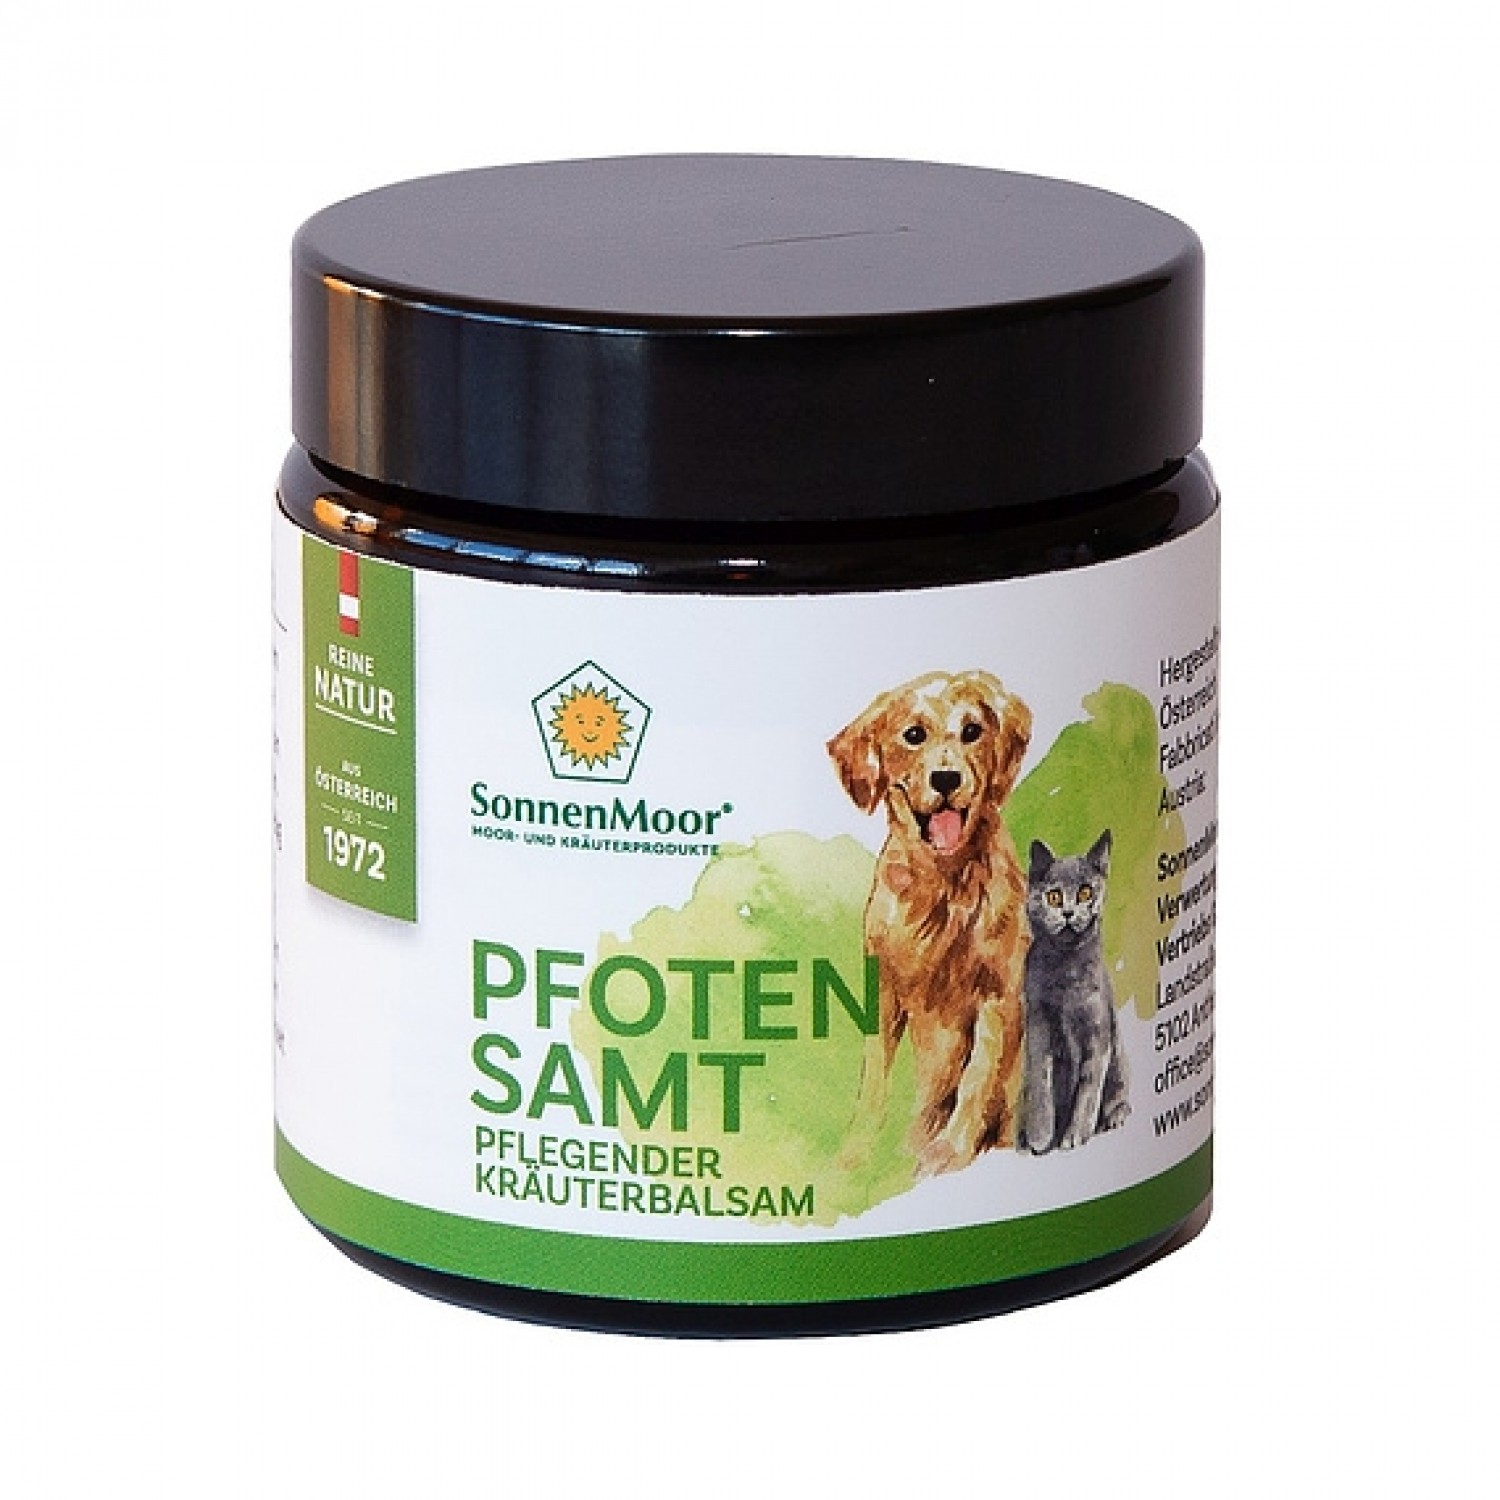 Paw Cream “Pfotensamt” - natural remedy for dogs & cats | Sonnemoor